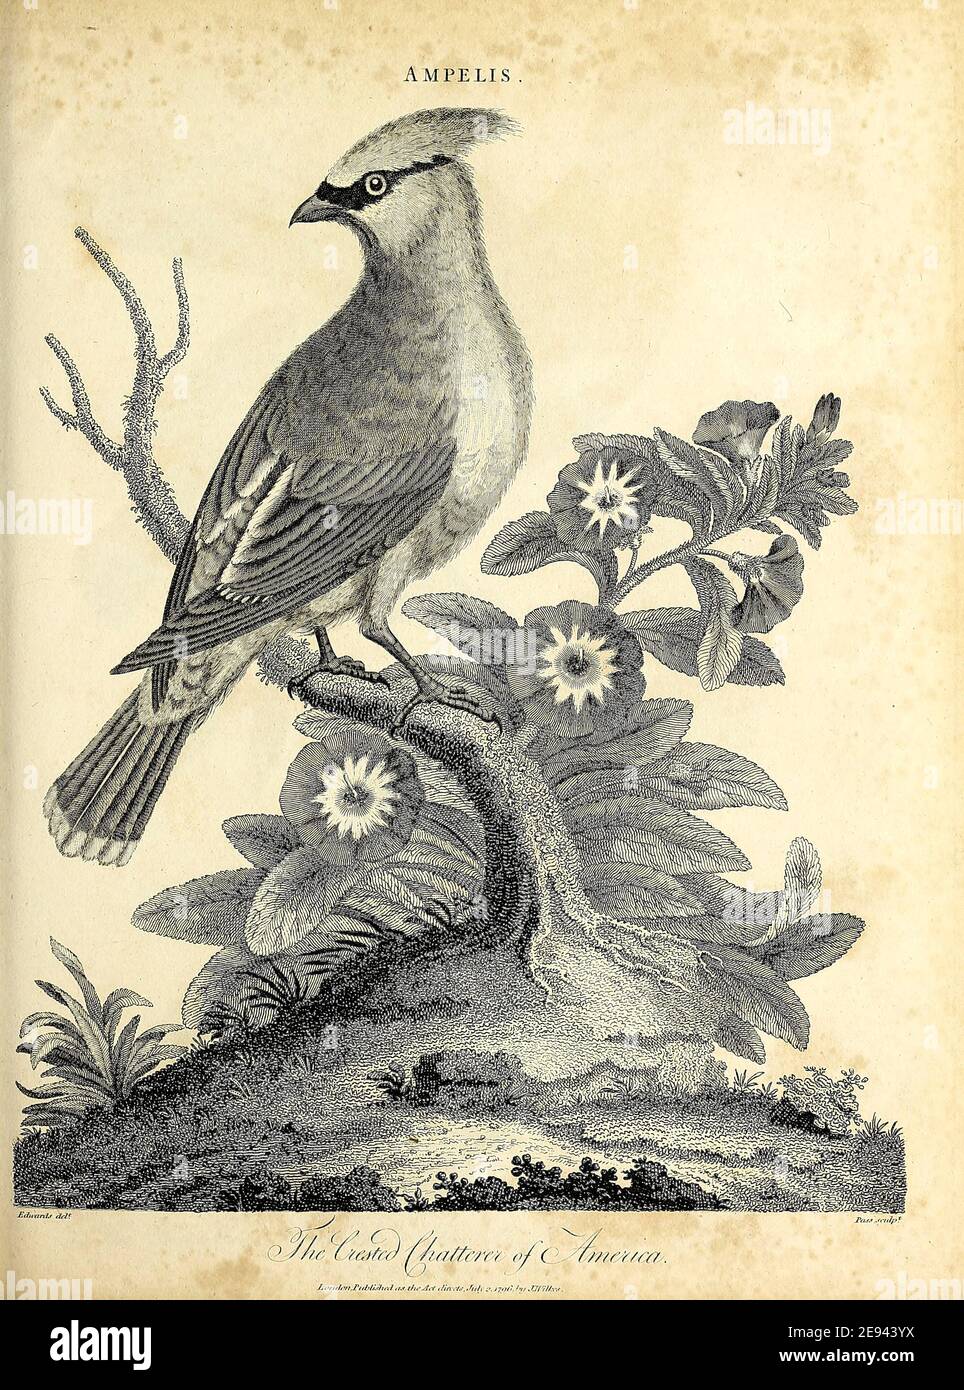 Ampelis - The Crested Chatterer of America Copperplate engraving From the Encyclopaedia Londinensis or, Universal dictionary of arts, sciences, and literature; Volume I;  Edited by Wilkes, John. Published in London in 1810 Stock Photo